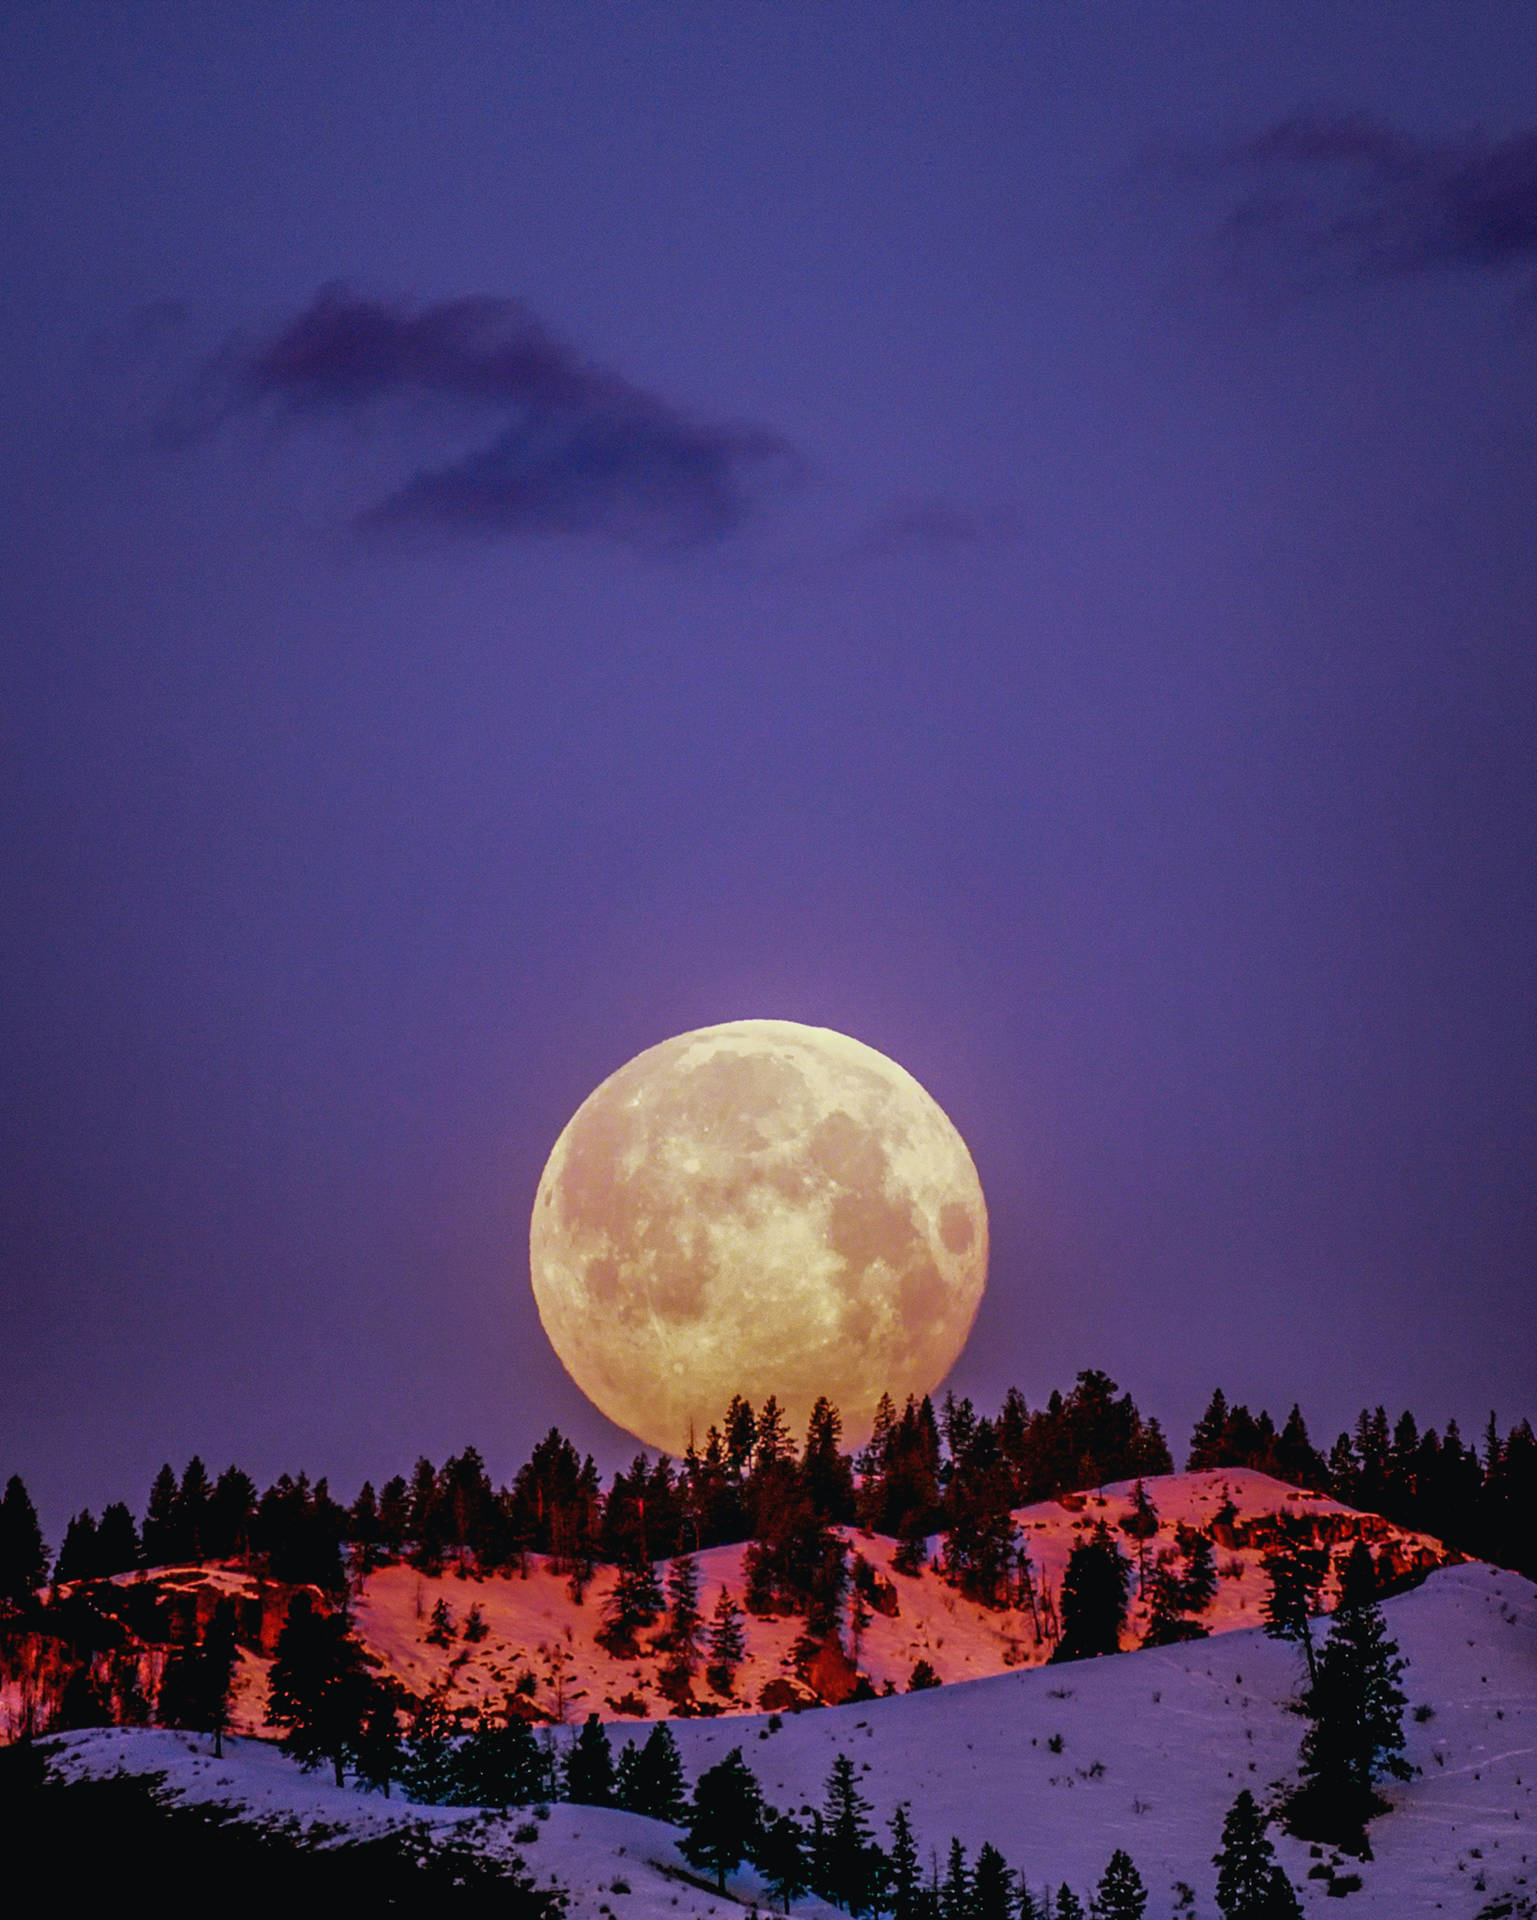 Full Moon Over Snowy Landscape Background